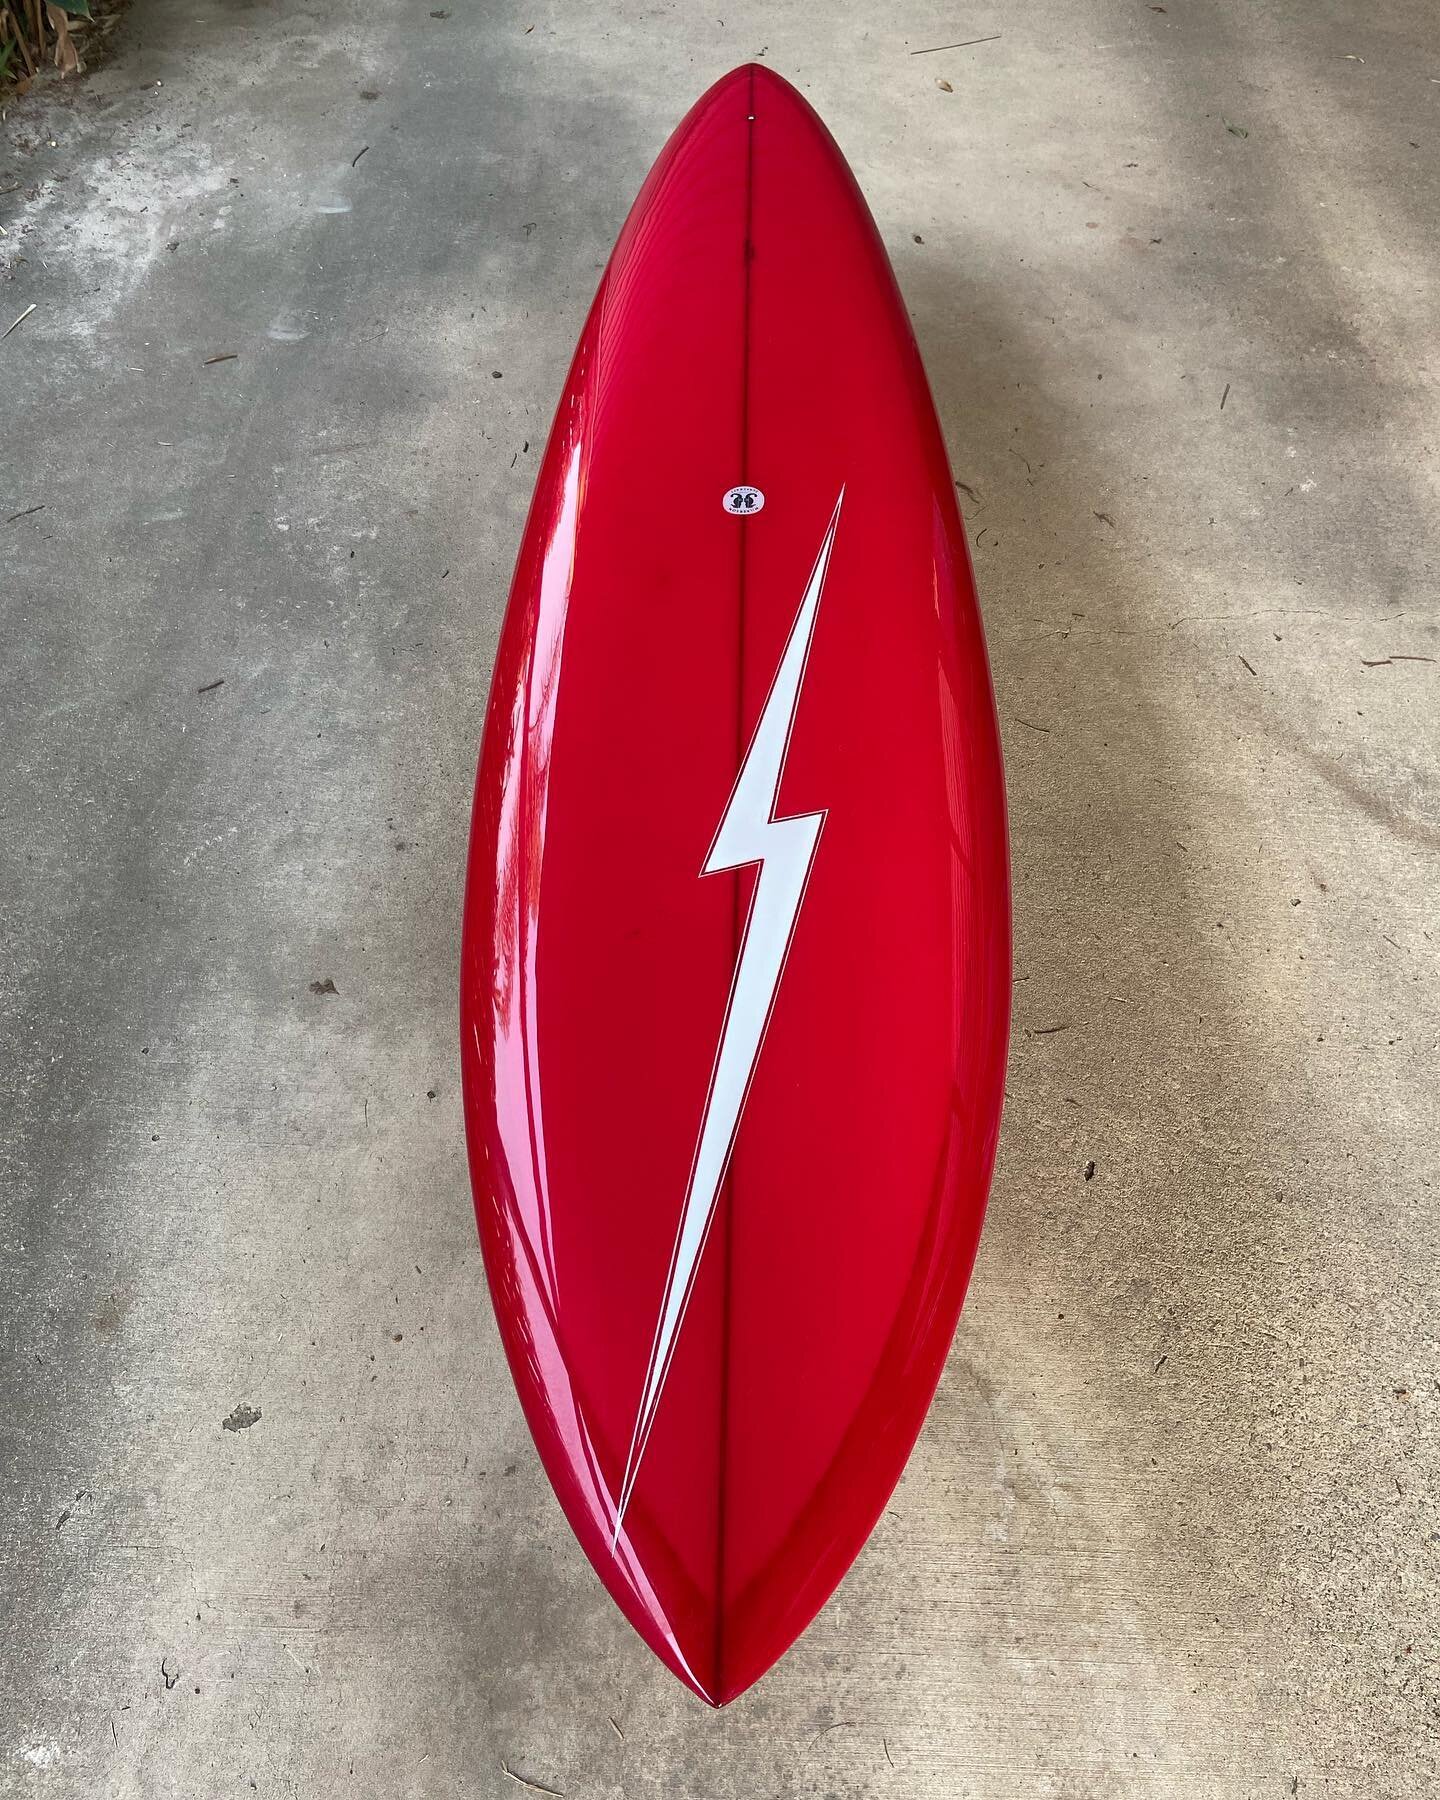 7&rsquo;10&rdquo; #custom #handshape for @virgo4564  Time travel to a time when single fins with forward volume ere the ticket.  Red tint cutlap gloss and polish vee bottom single fin fcs box.  #retro #slingshot #waveplacement #speed  #classic #shine